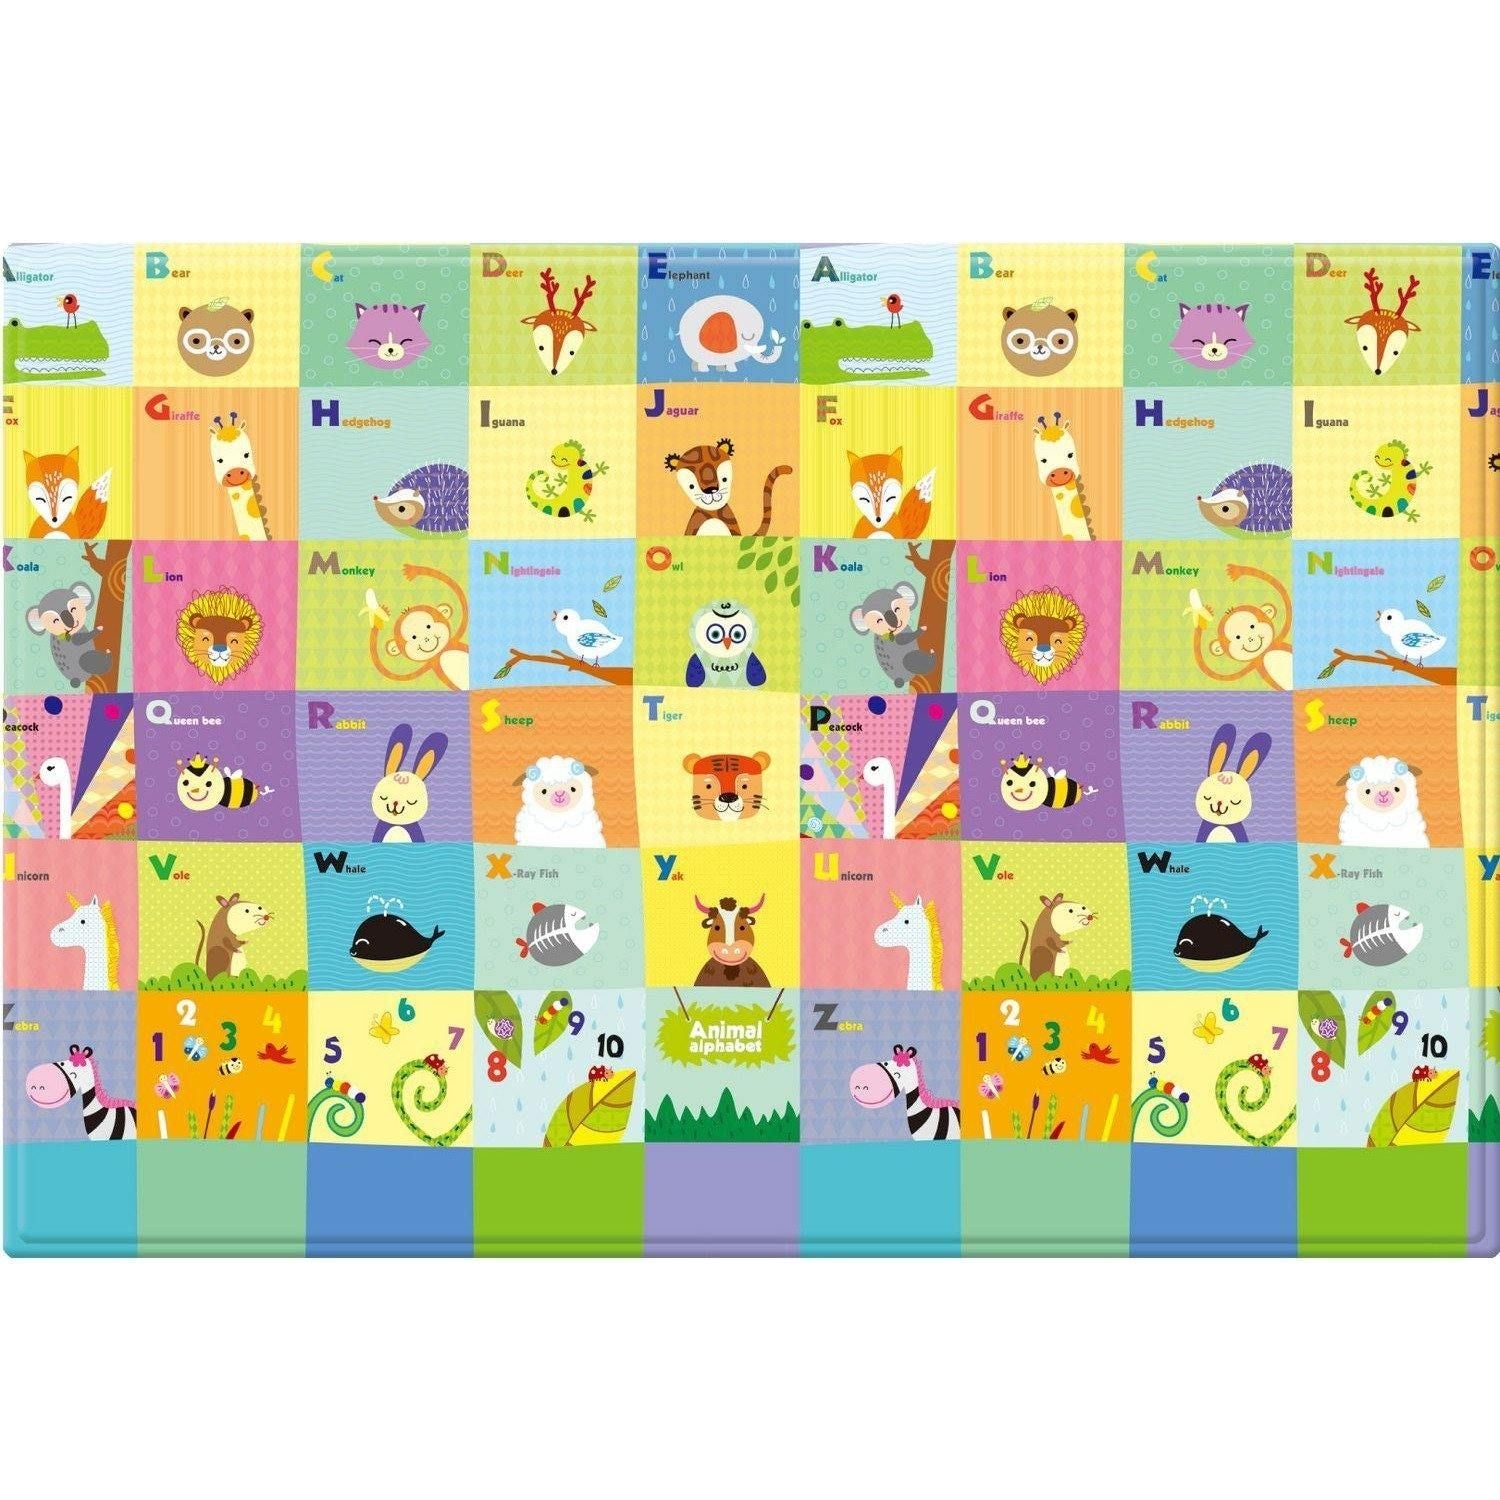 BABY CARE PLAYMAT - BIRDS IN THE TREES - LARGE - Emmbaby Canada